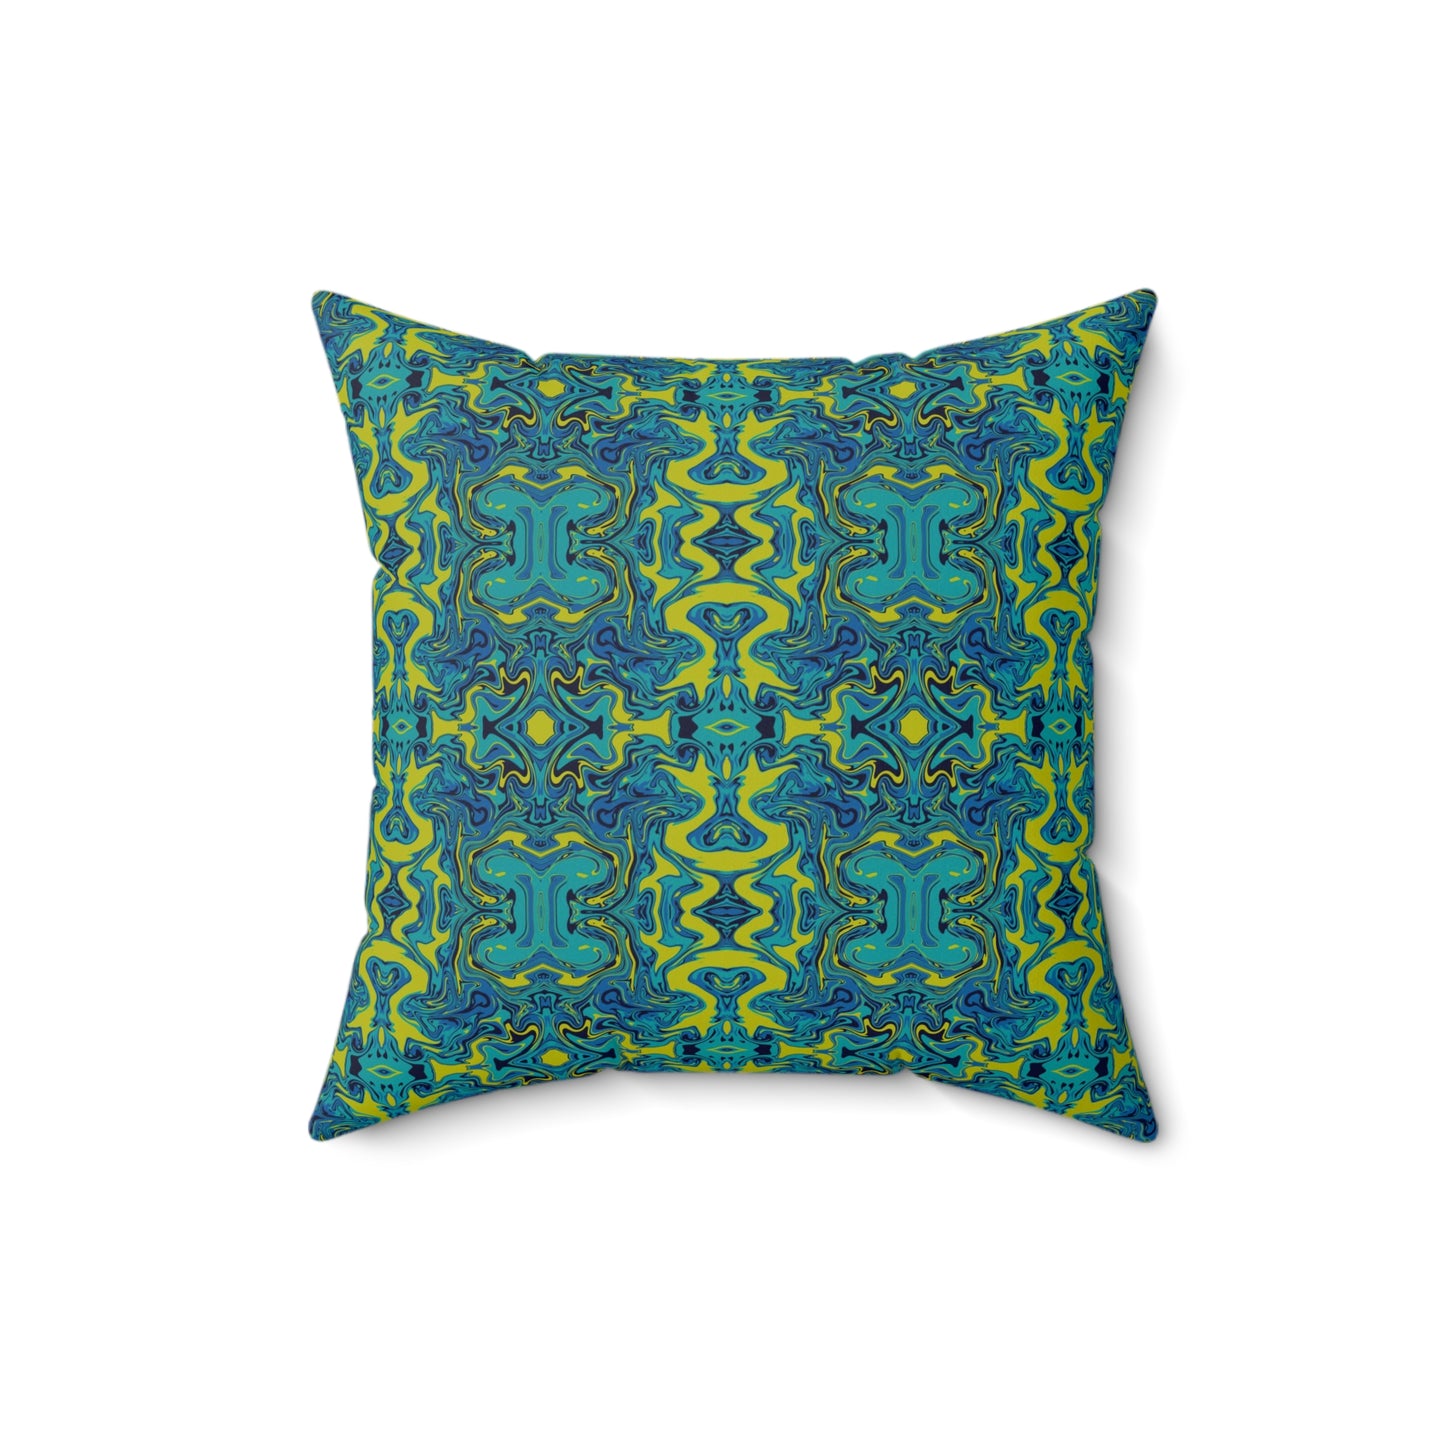 Boho Psychadelic Liquify in blue and green Spun Polyester Square Pillow